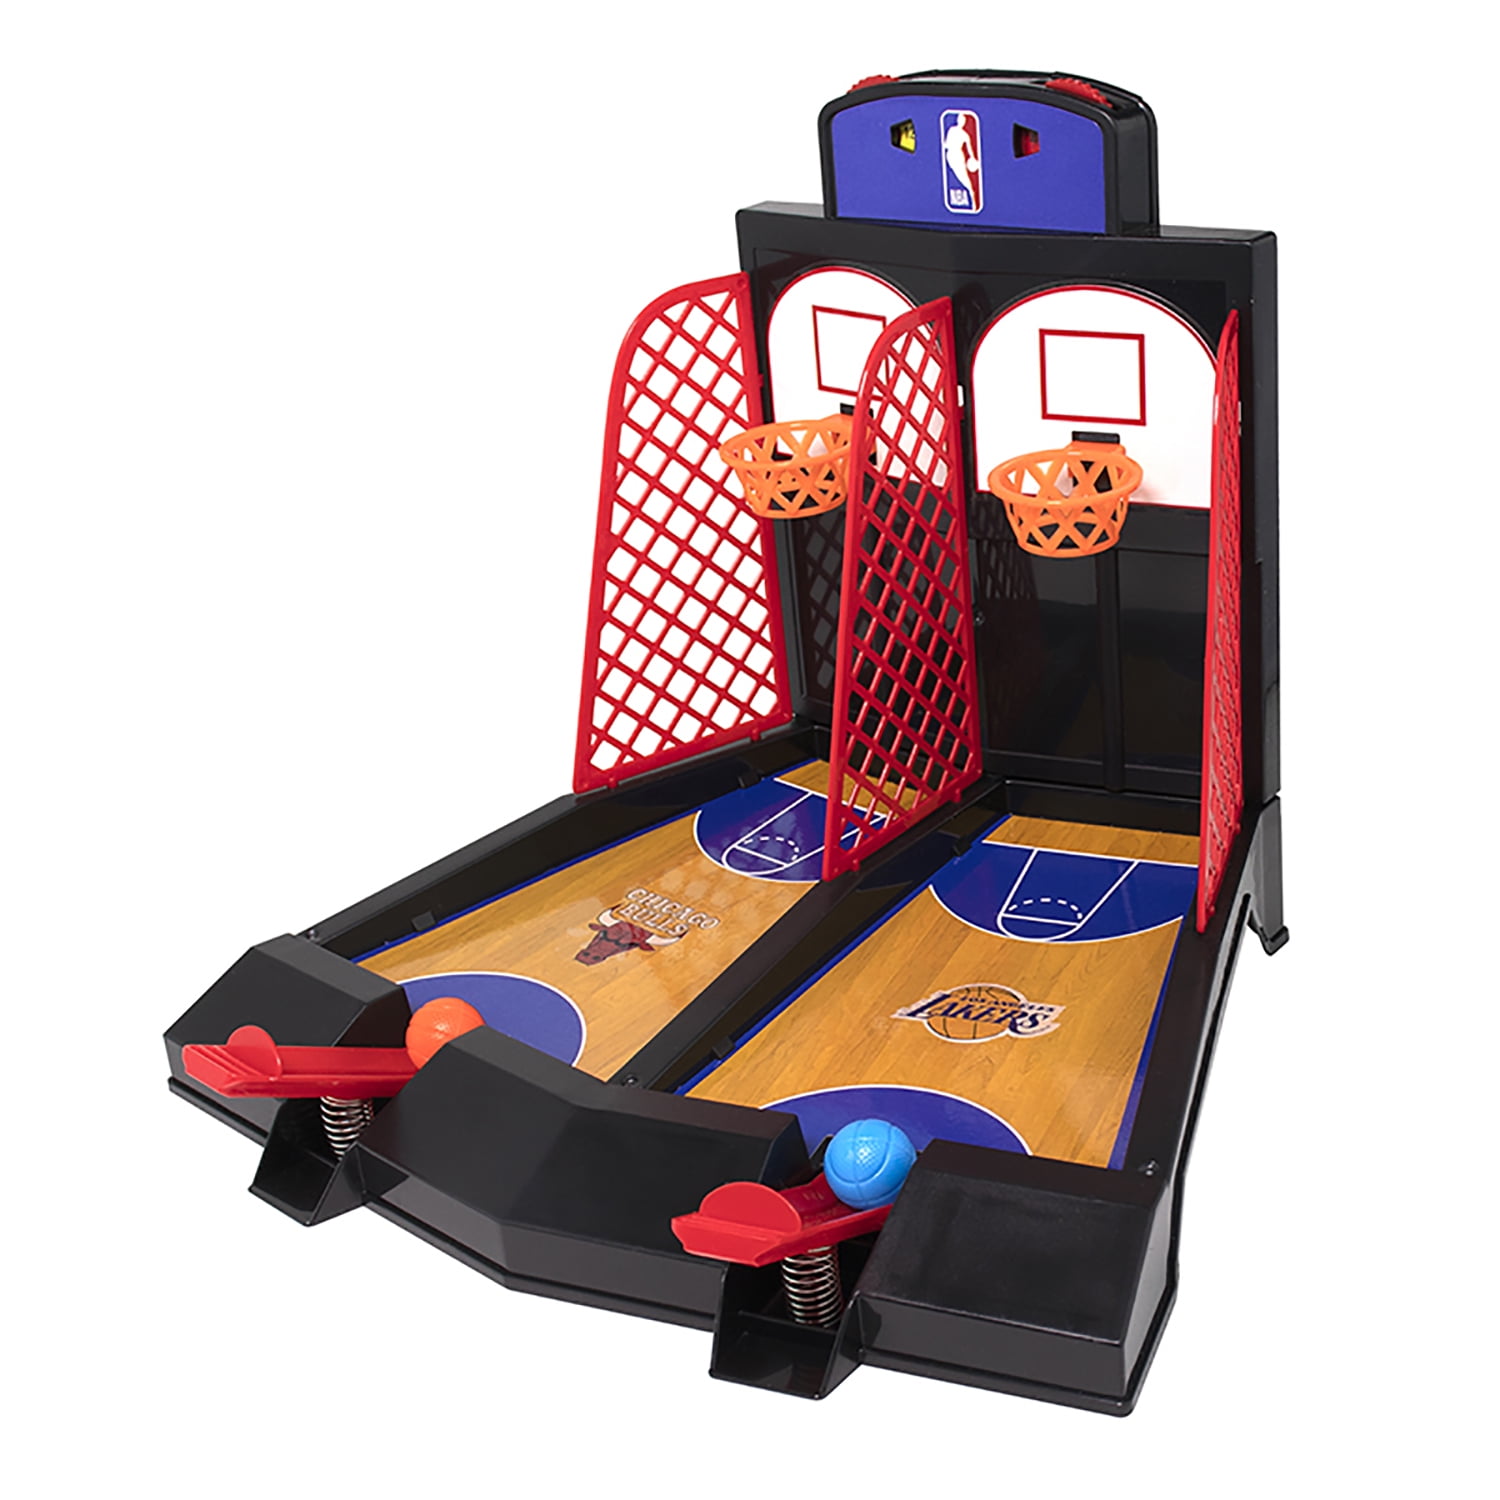 Classic Sports Table Top Basketball game Brand New!!!   tons of fun!! 